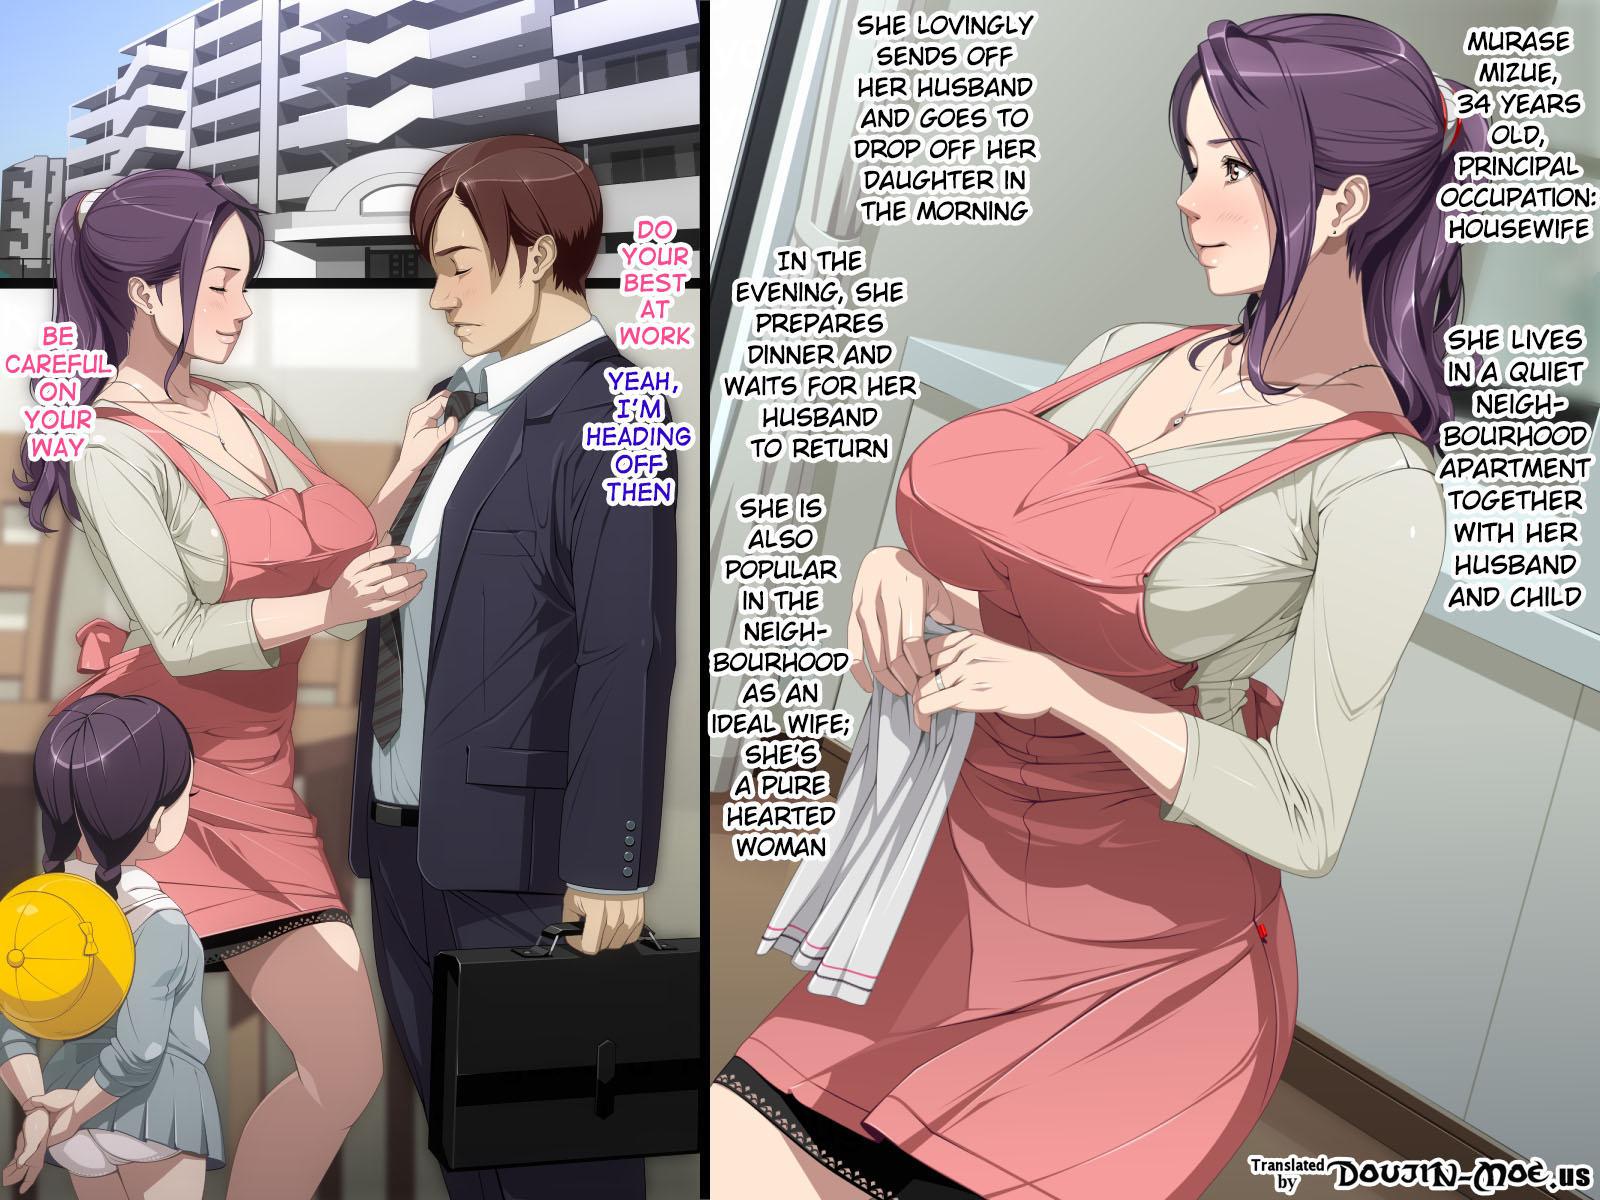 Mature! Mizue and her Father-in-Laws Secret Relationship